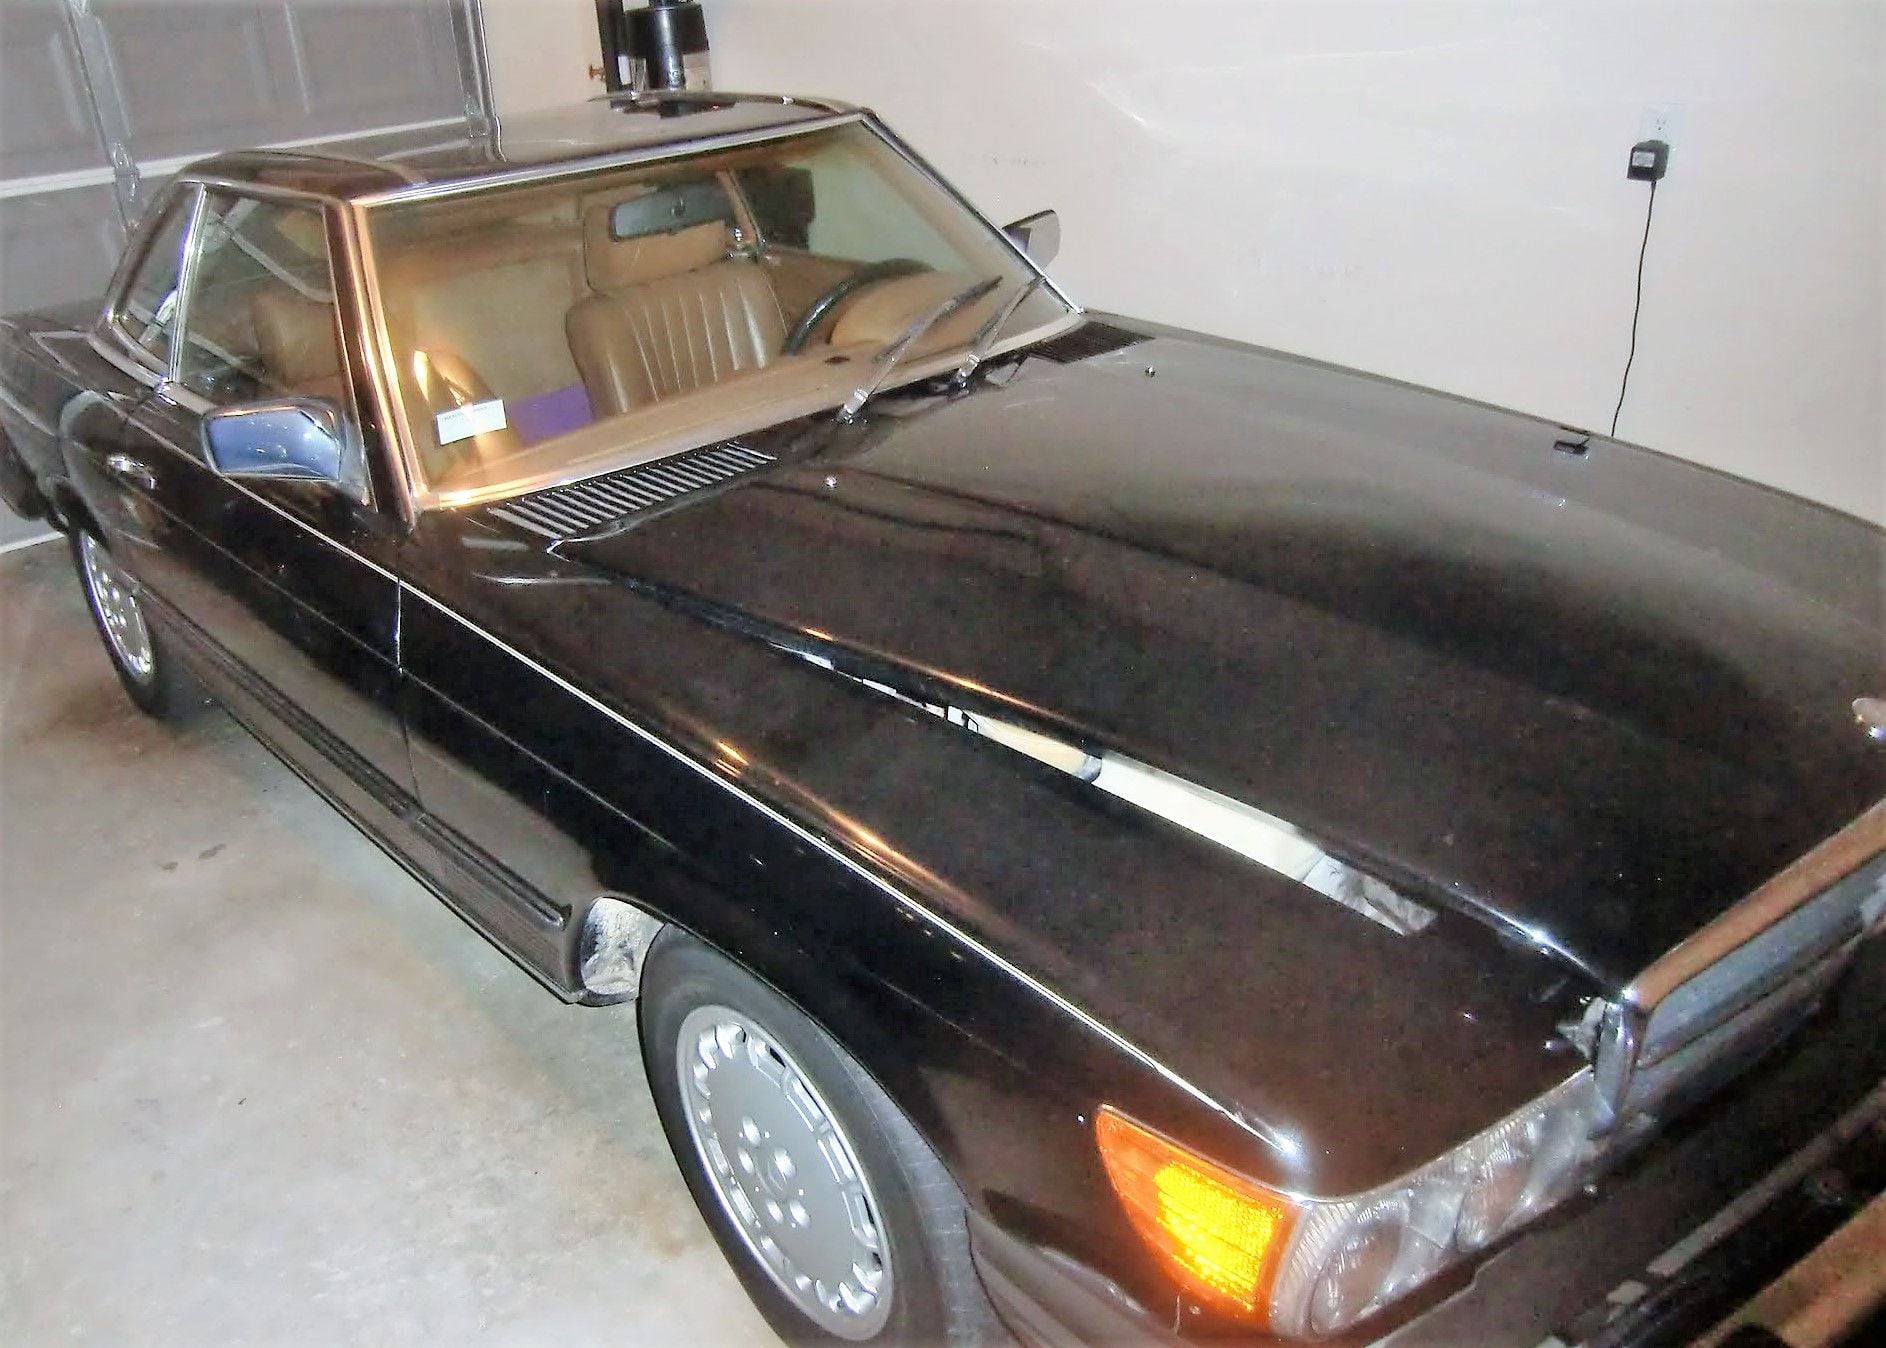 1979 Mercedes-Benz 450SL - 1979 450SL for sale - Used - VIN 10704412057279 - 135,000 Miles - 8 cyl - 2WD - Automatic - Convertible - Black - Houston, TX 77494, United States